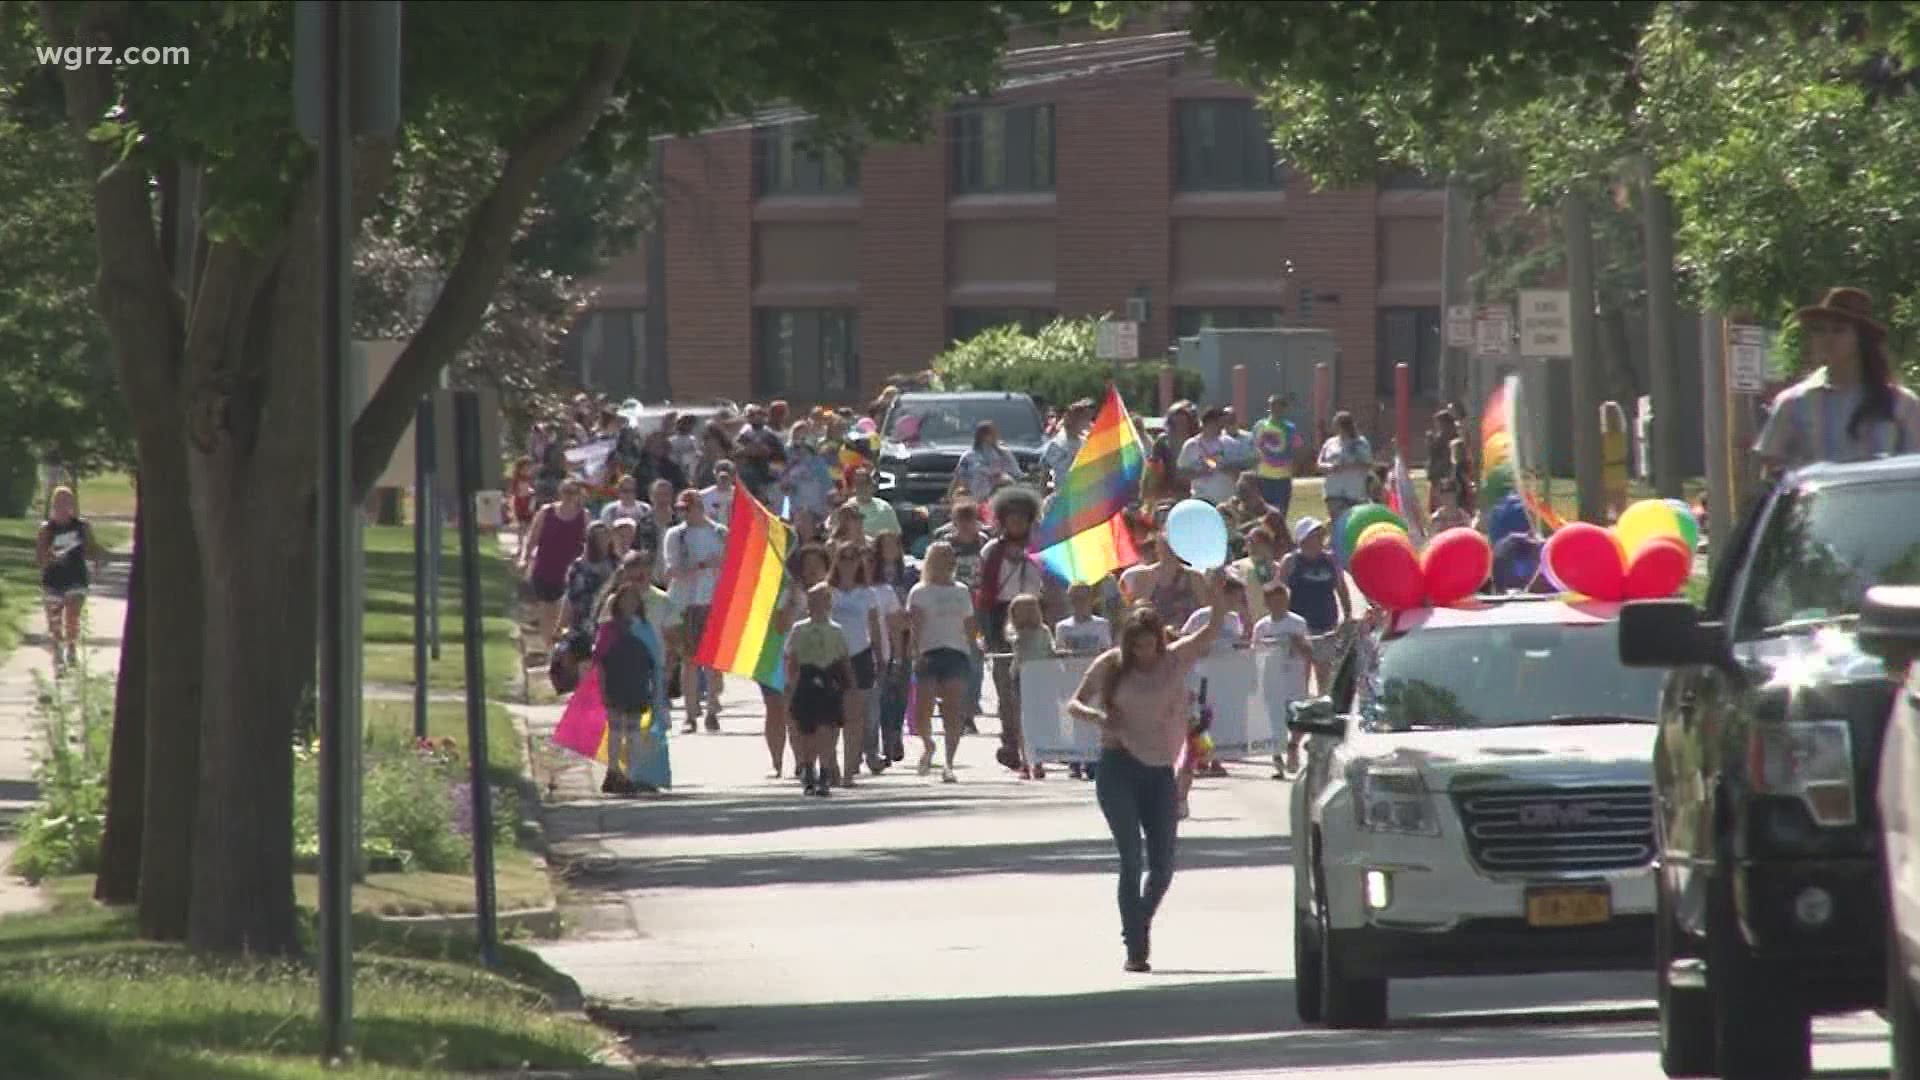 The Town of Batavia held its second ever Pride parade this morning, the kickoff event amid for a weekend of celebration.